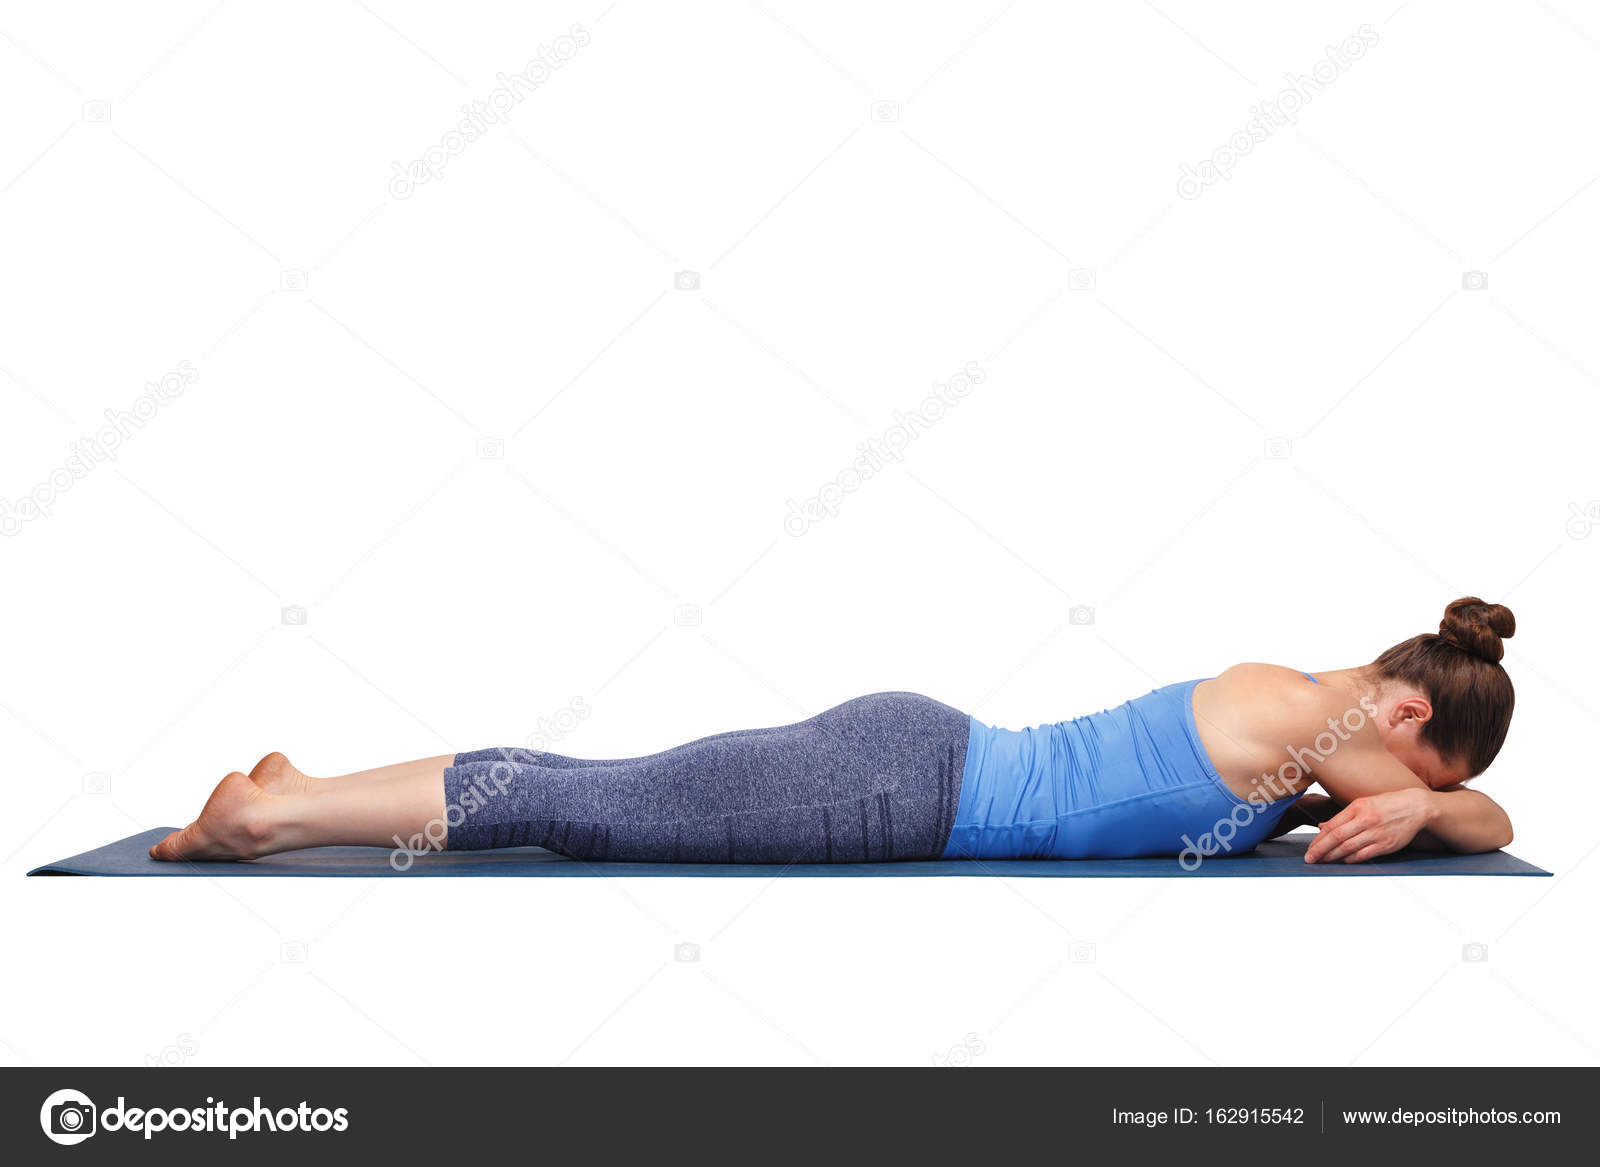 Yoga asanas to ease back pain - Times of India